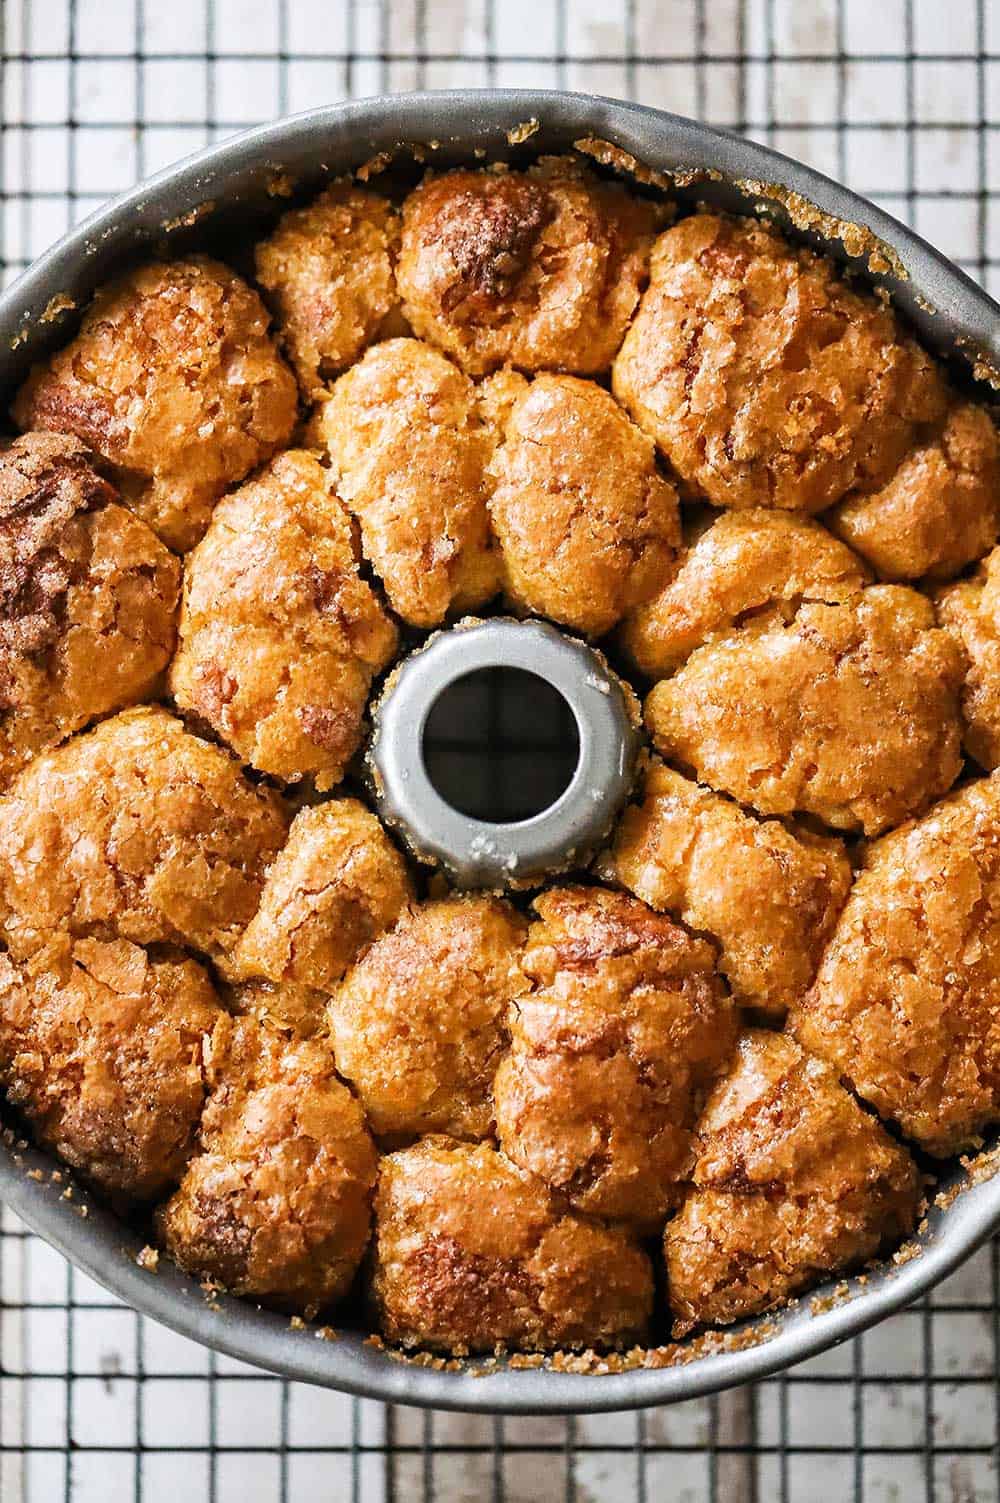 A bundt pan filled with cooked monkey bread sitting on a baking rack.